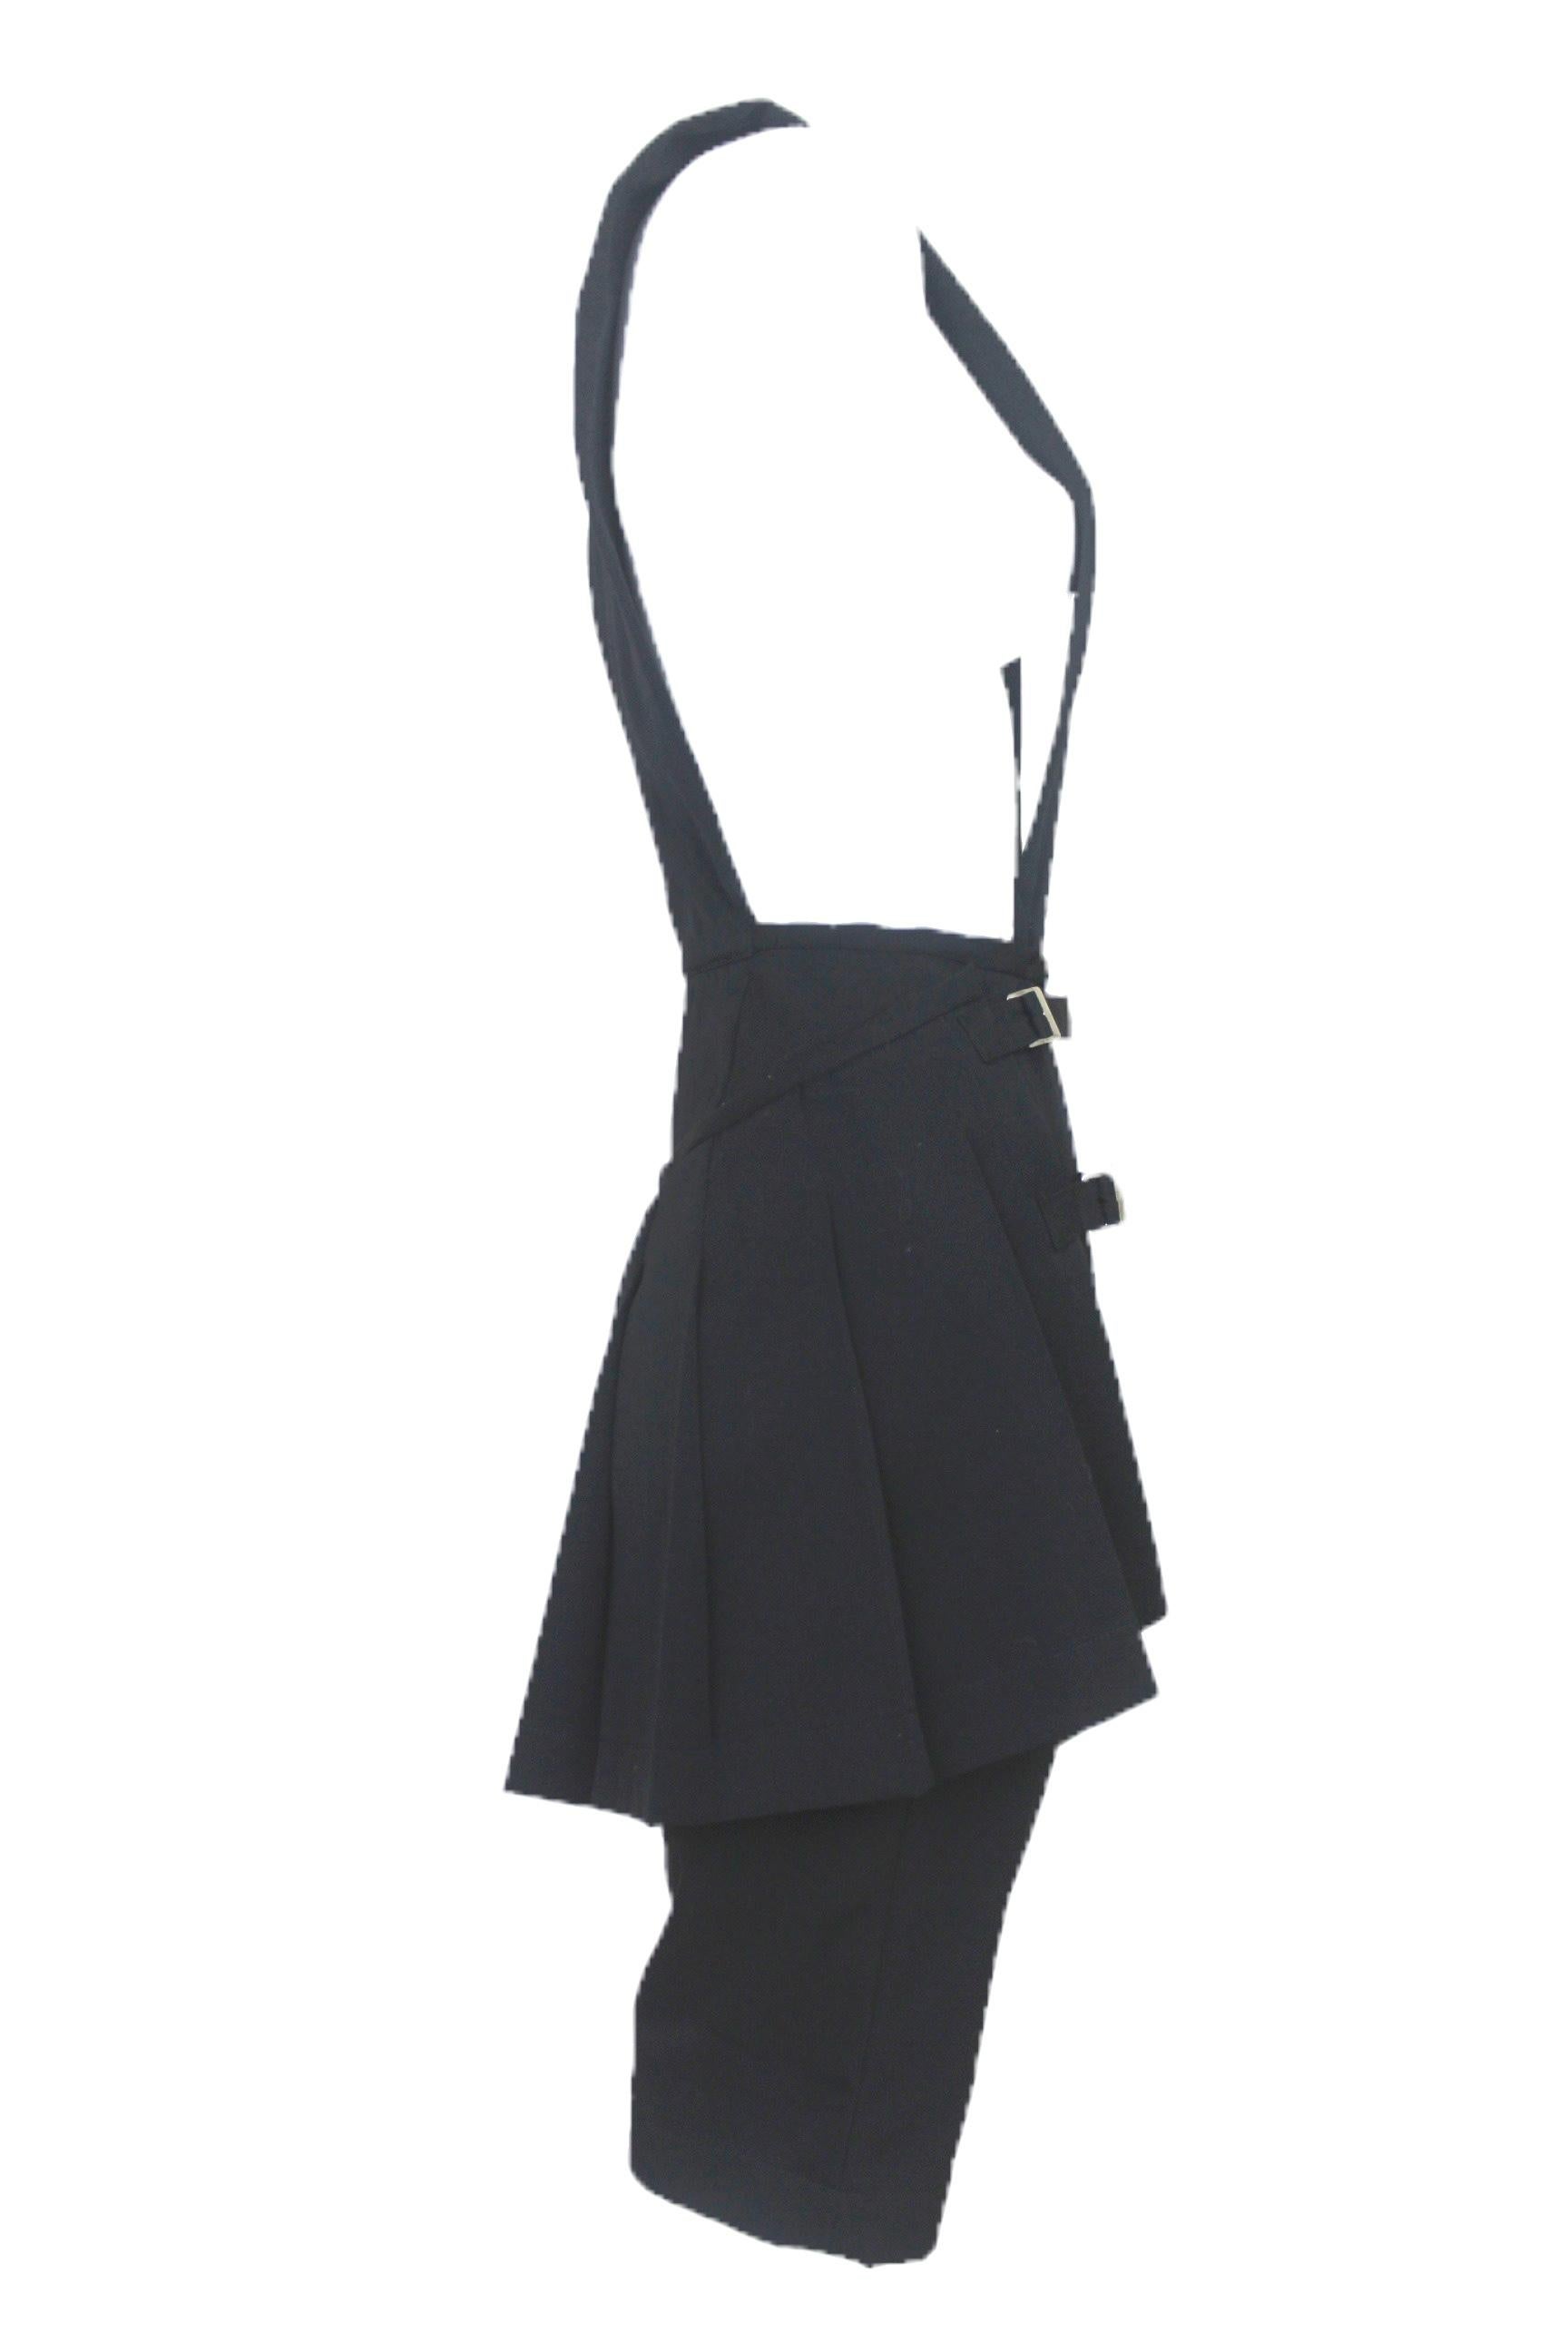 Comme des Garcons 1989 Collection Reverse Dungarees with attached Skirt For Sale 6